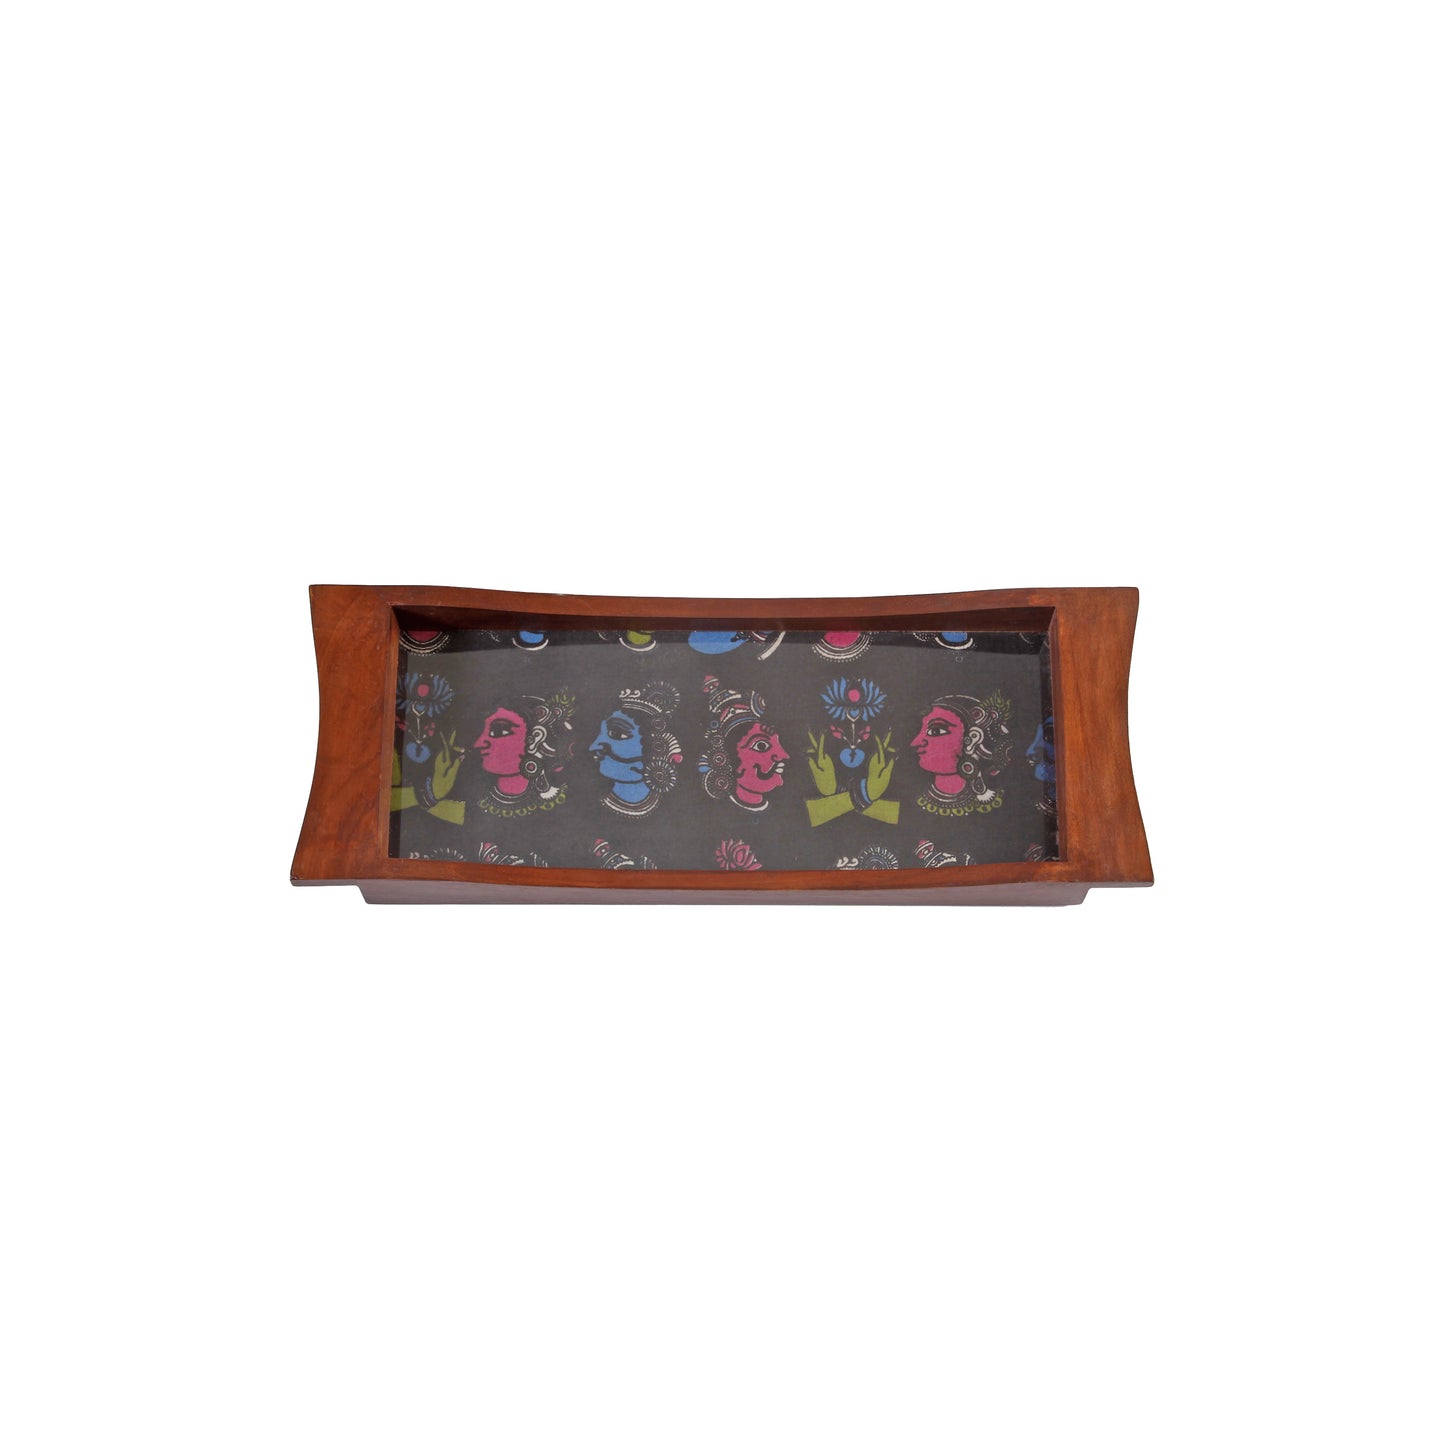 A Tiny Mistake Colourful Kalamkari Faces on Black Base Boat Shaped Teak Serving Tray, Tray for Serving Tea and Snacks, 35 x 15 x 4 cm